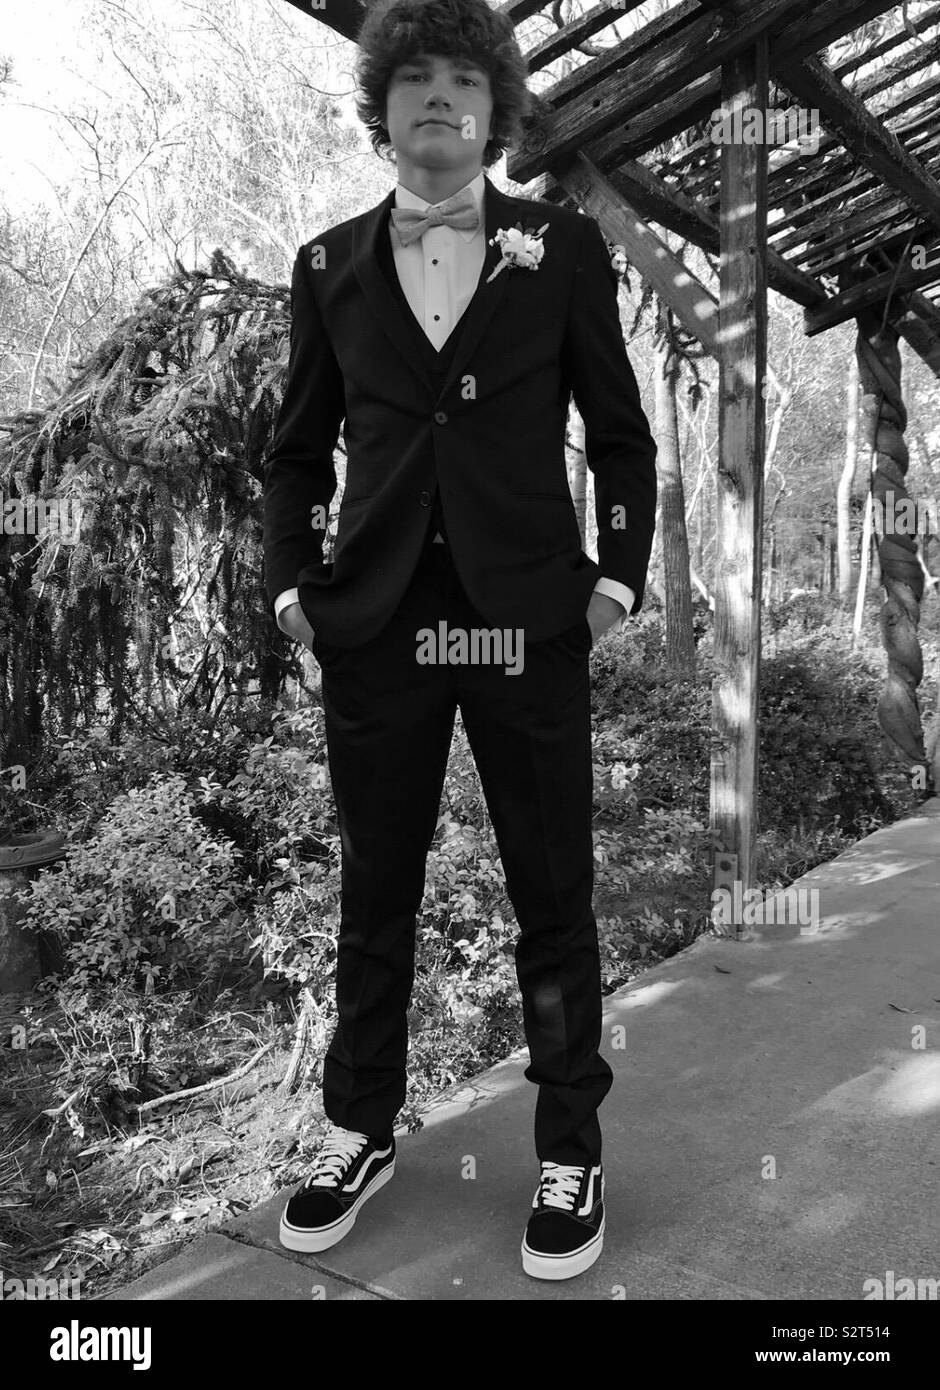 Prom. Boy in tuxedo standing in archway with hands in pocket wearing vans  tennis shoes. Nature. Flowers bushes in background. Black and white picture  Stock Photo - Alamy